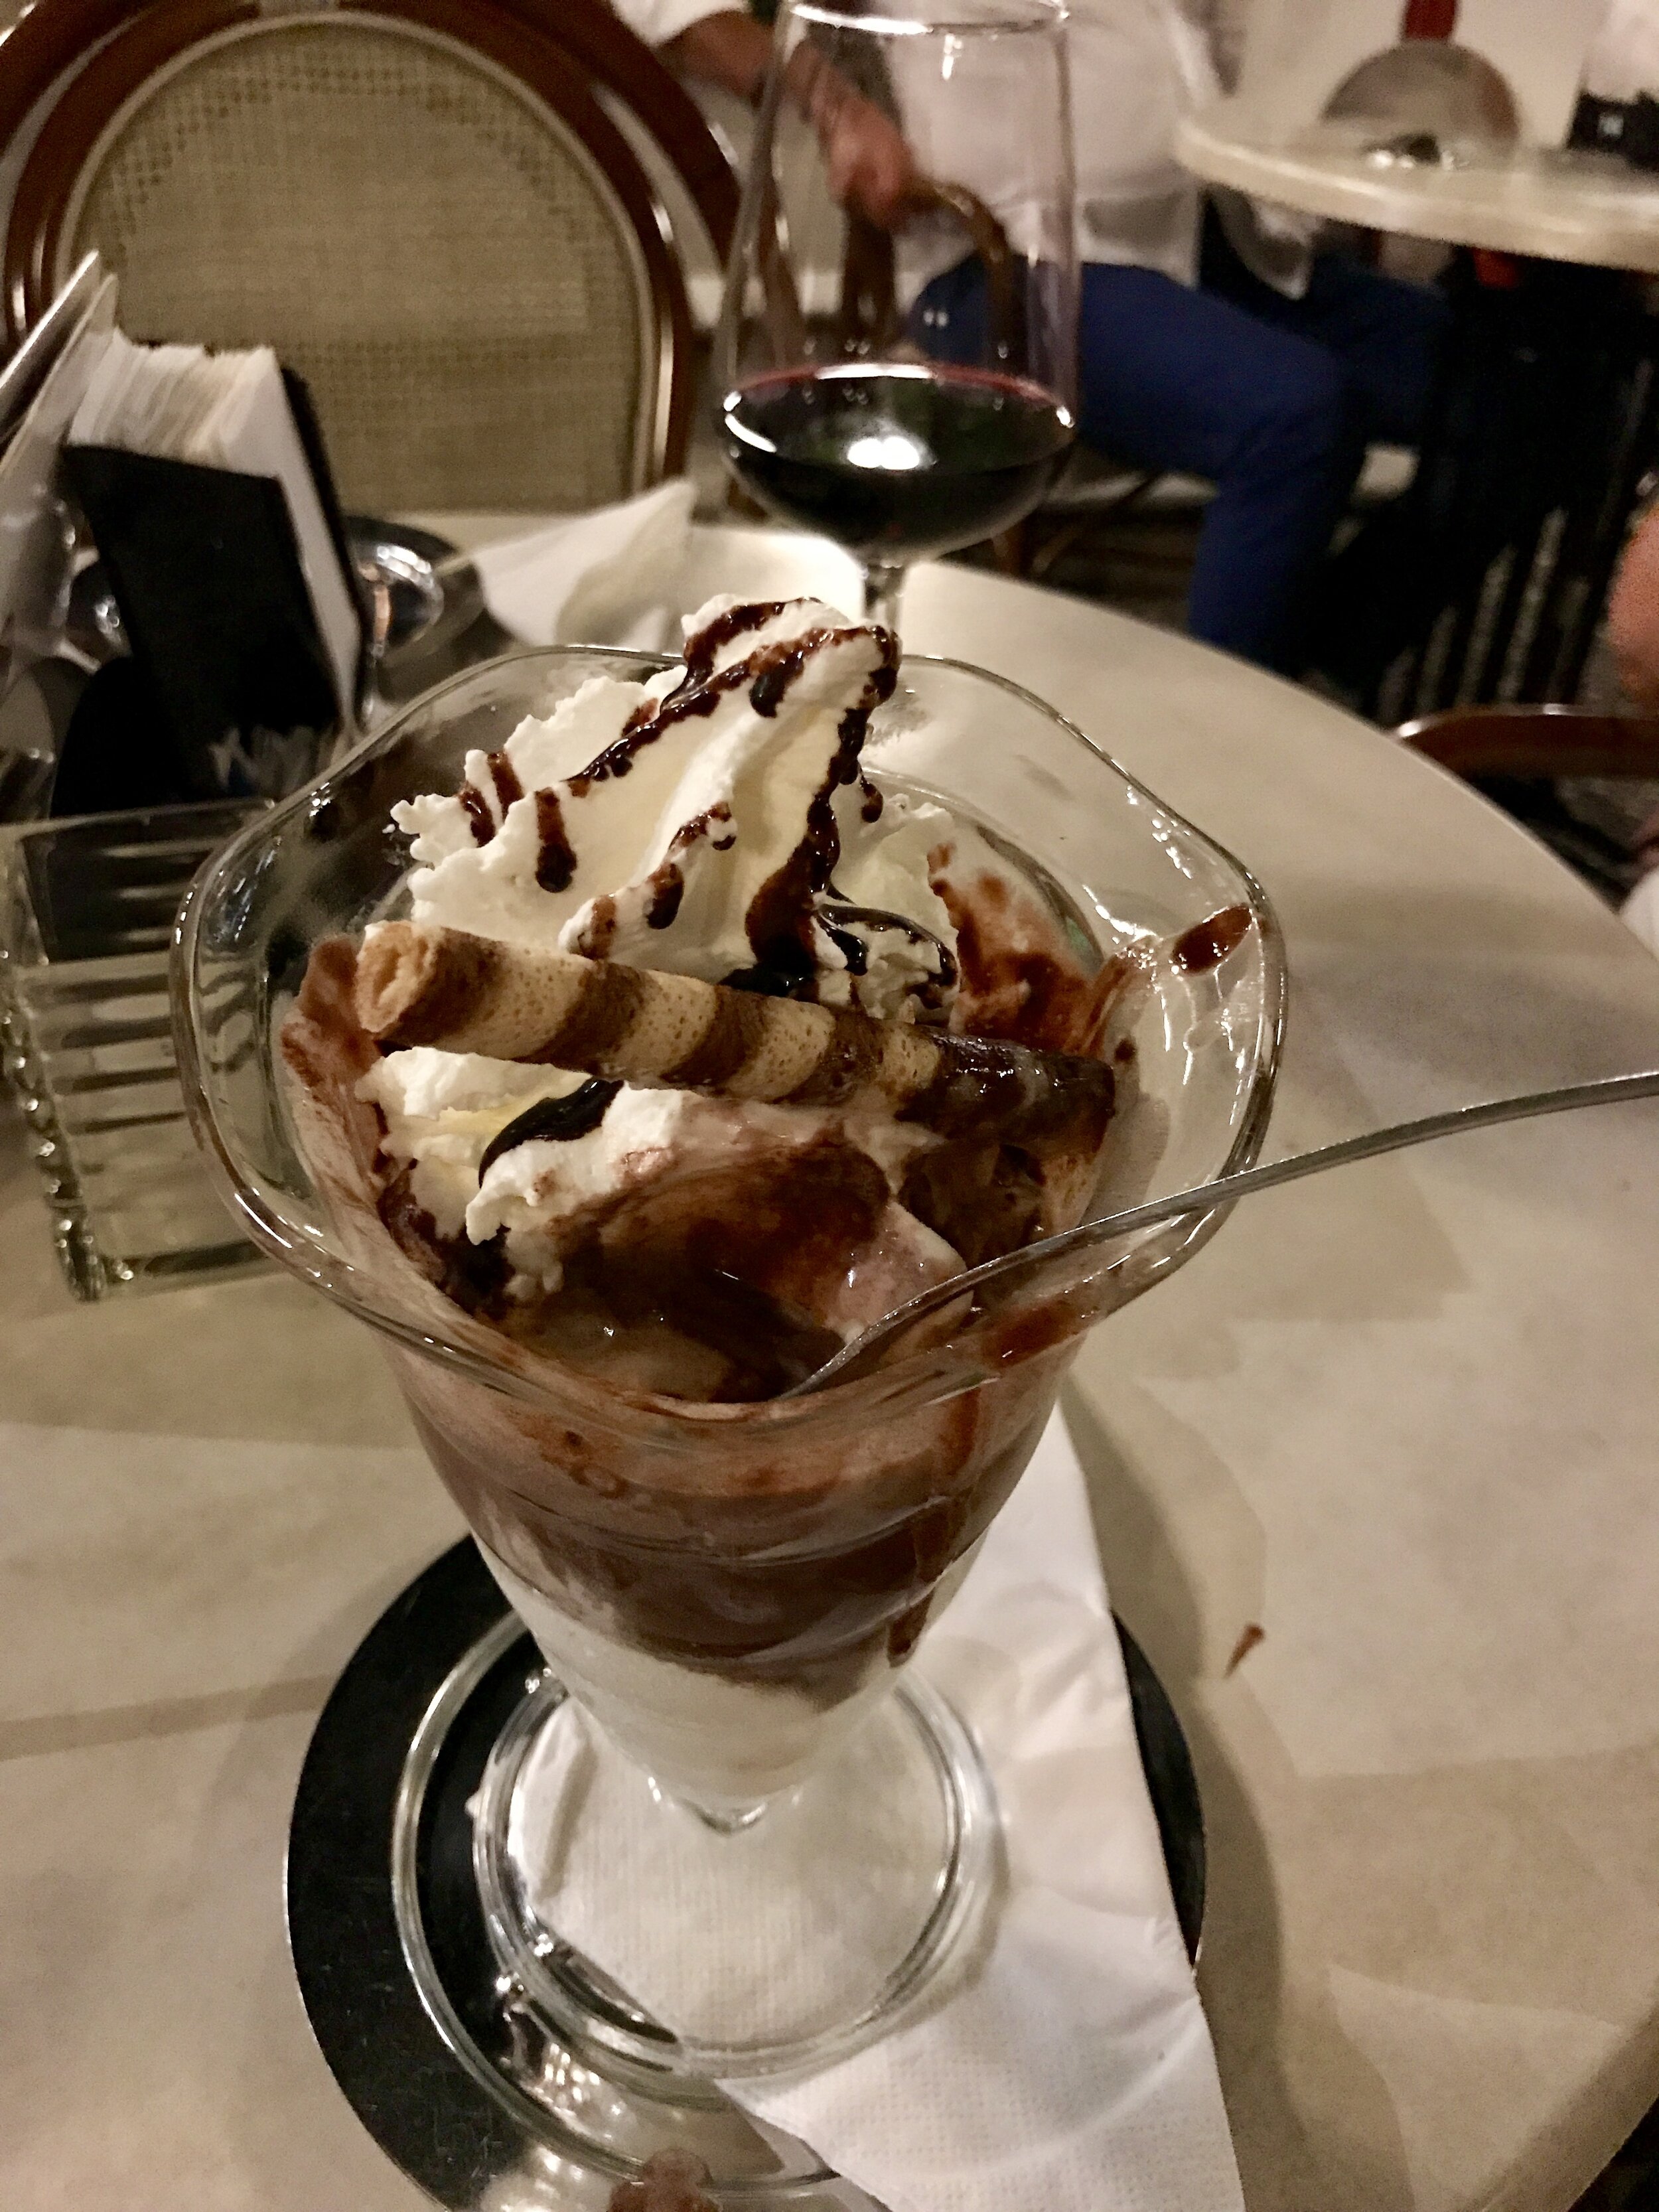 Lake Como Travel Guide: Ice cream at the Palace Hotel